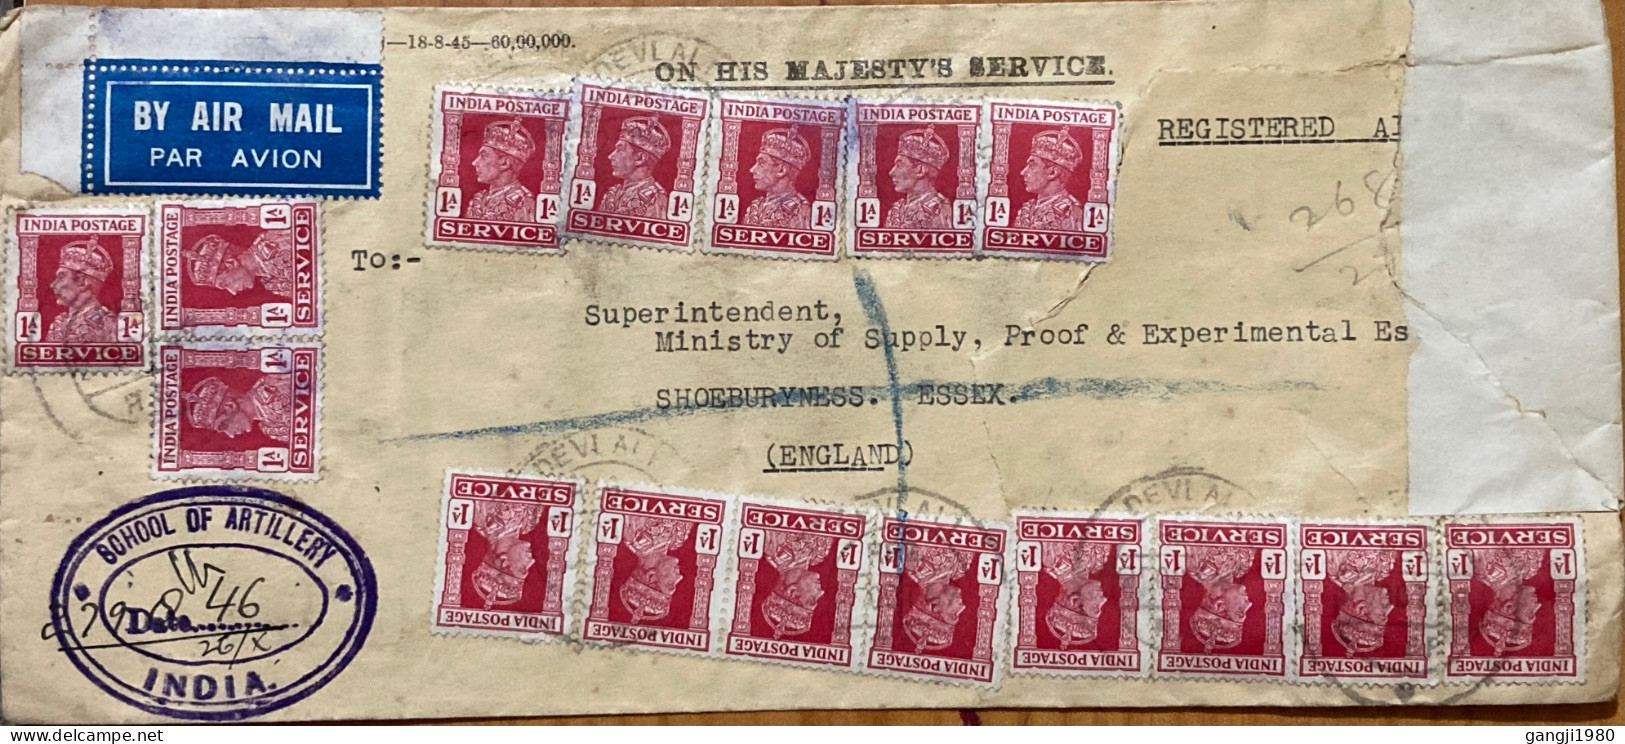 INDIA 1940, REGISTER COVER, USED TO ENGLAND, MILITARY ARMY, SCHOOL OF ARTILLERY, DEVLALI CITY CANCEL, MULTI 16 KING STAM - 1936-47 Koning George VI